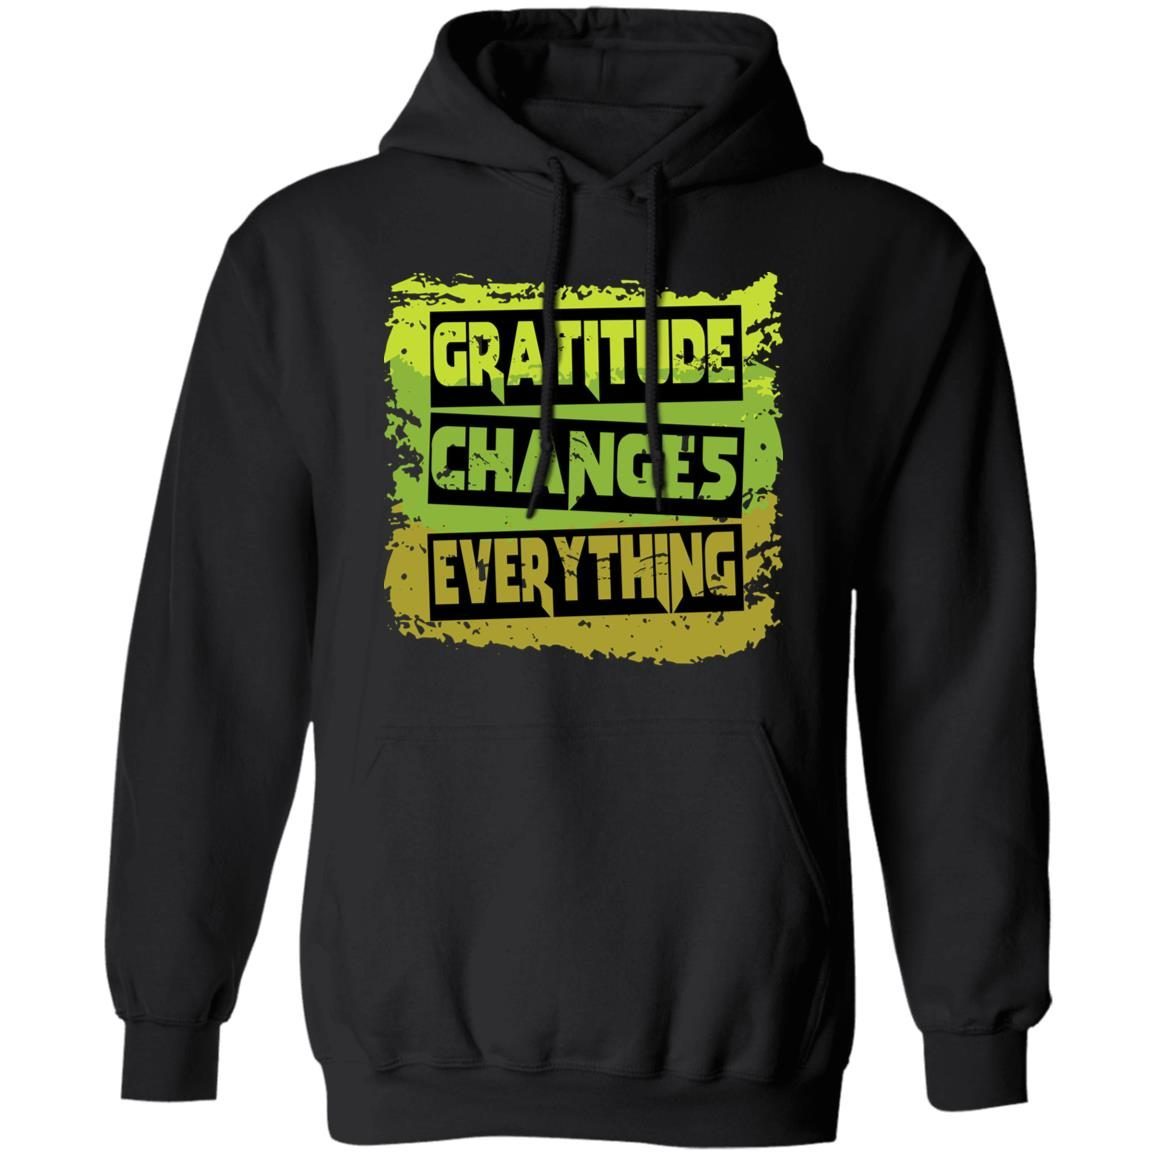 Gratitude Changes Everything Funny Quote shirt 2